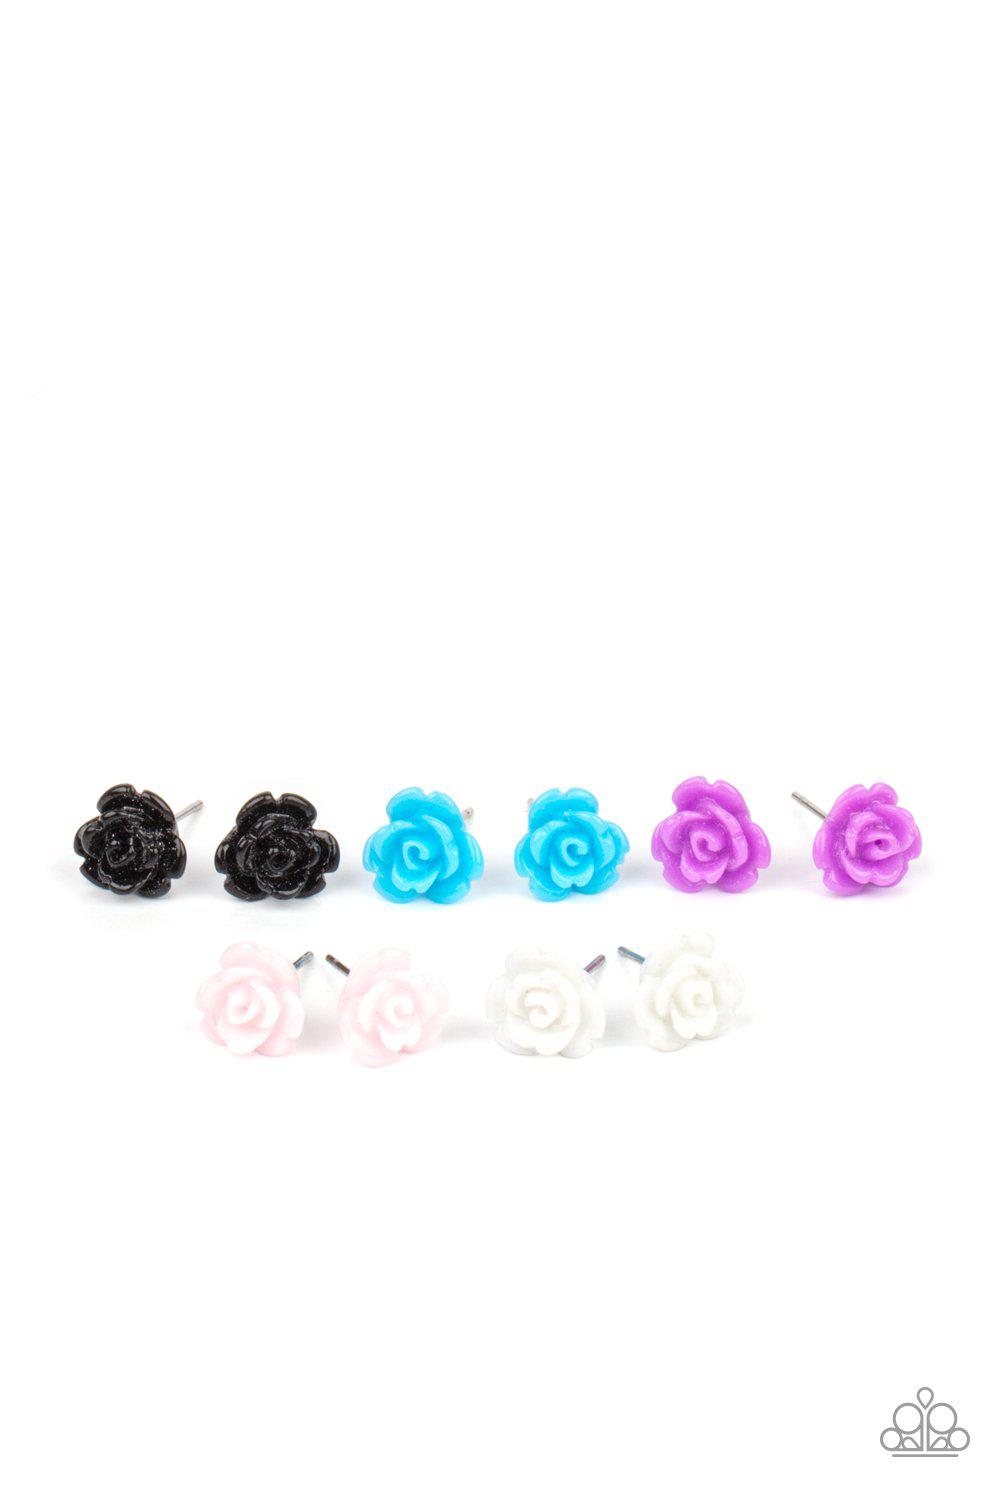 Starlet Shimmer Children&#39;s Rose Flower Post Earrings - Paparazzi Accessories (set of 5 pairs) - Full set -CarasShop.com - $5 Jewelry by Cara Jewels